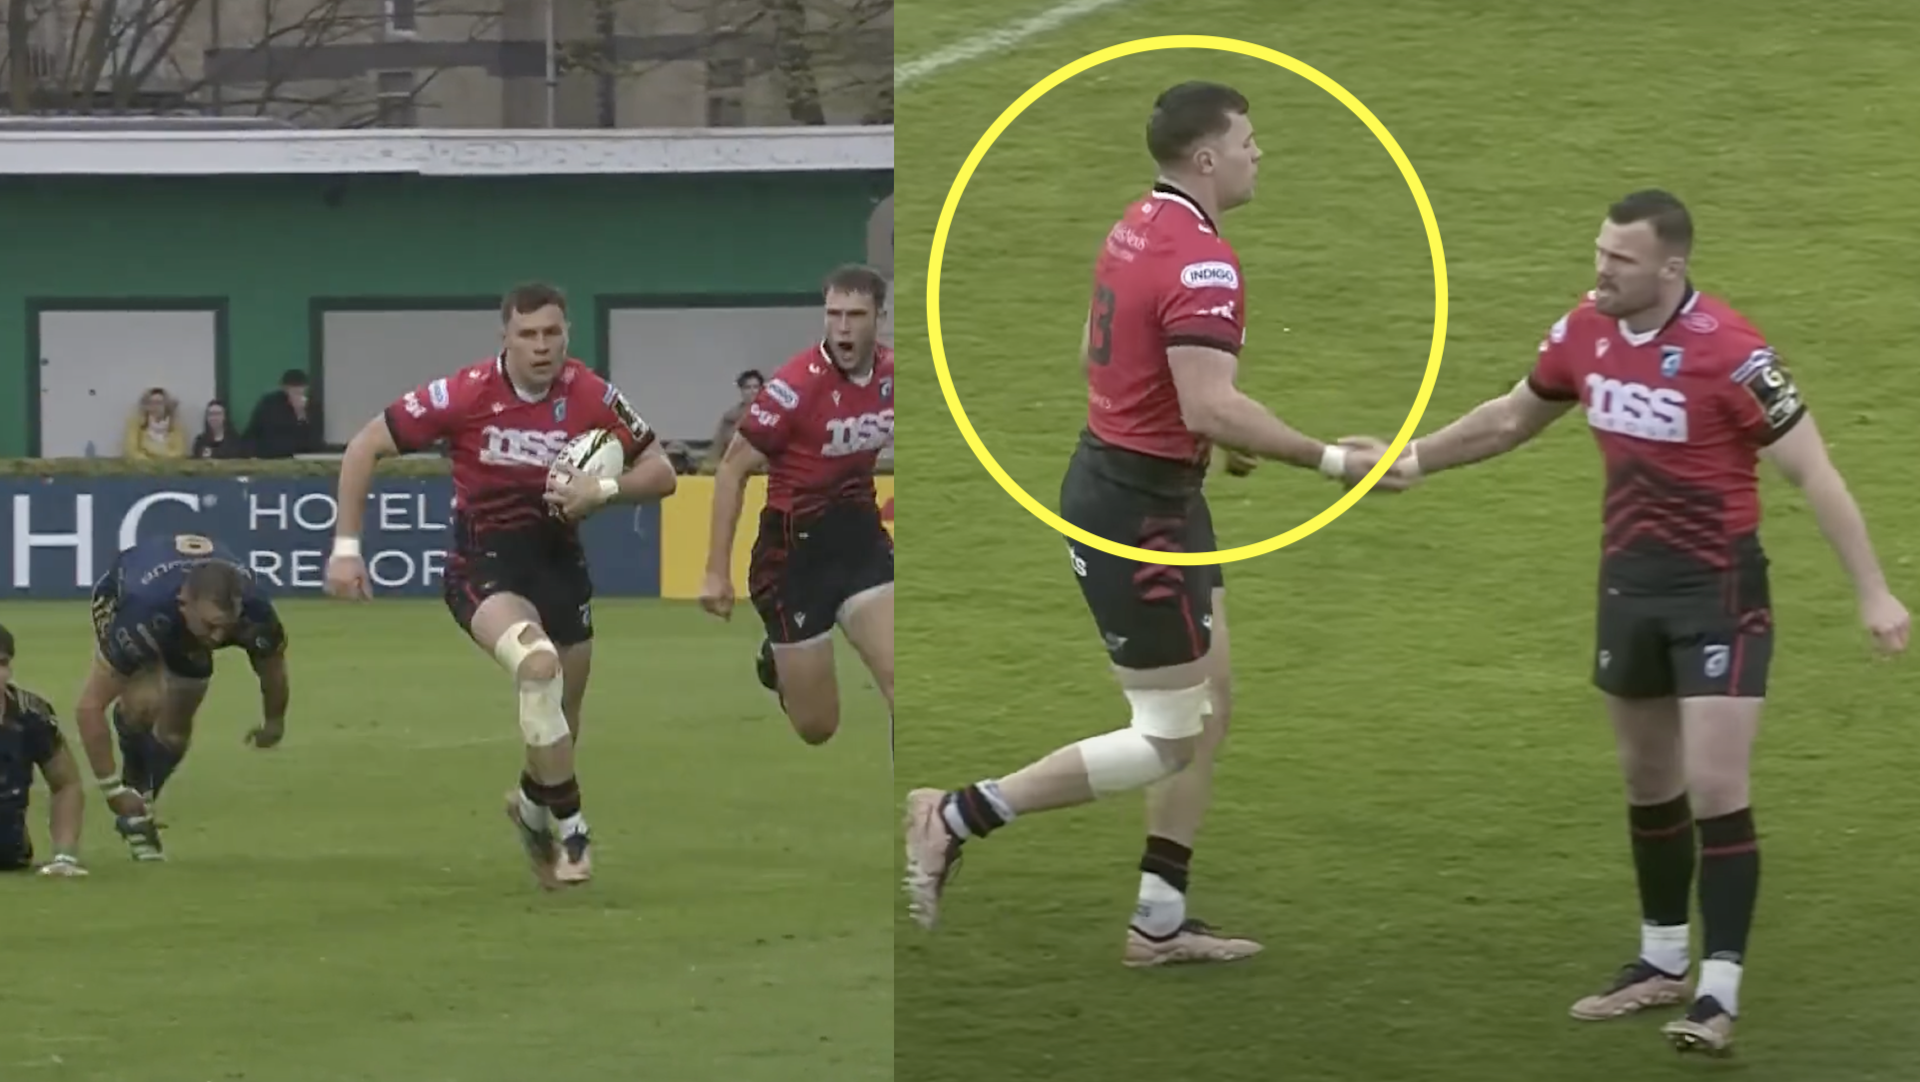 Wales' 110kg centre's try was everything Warren Gatland has dreamed of